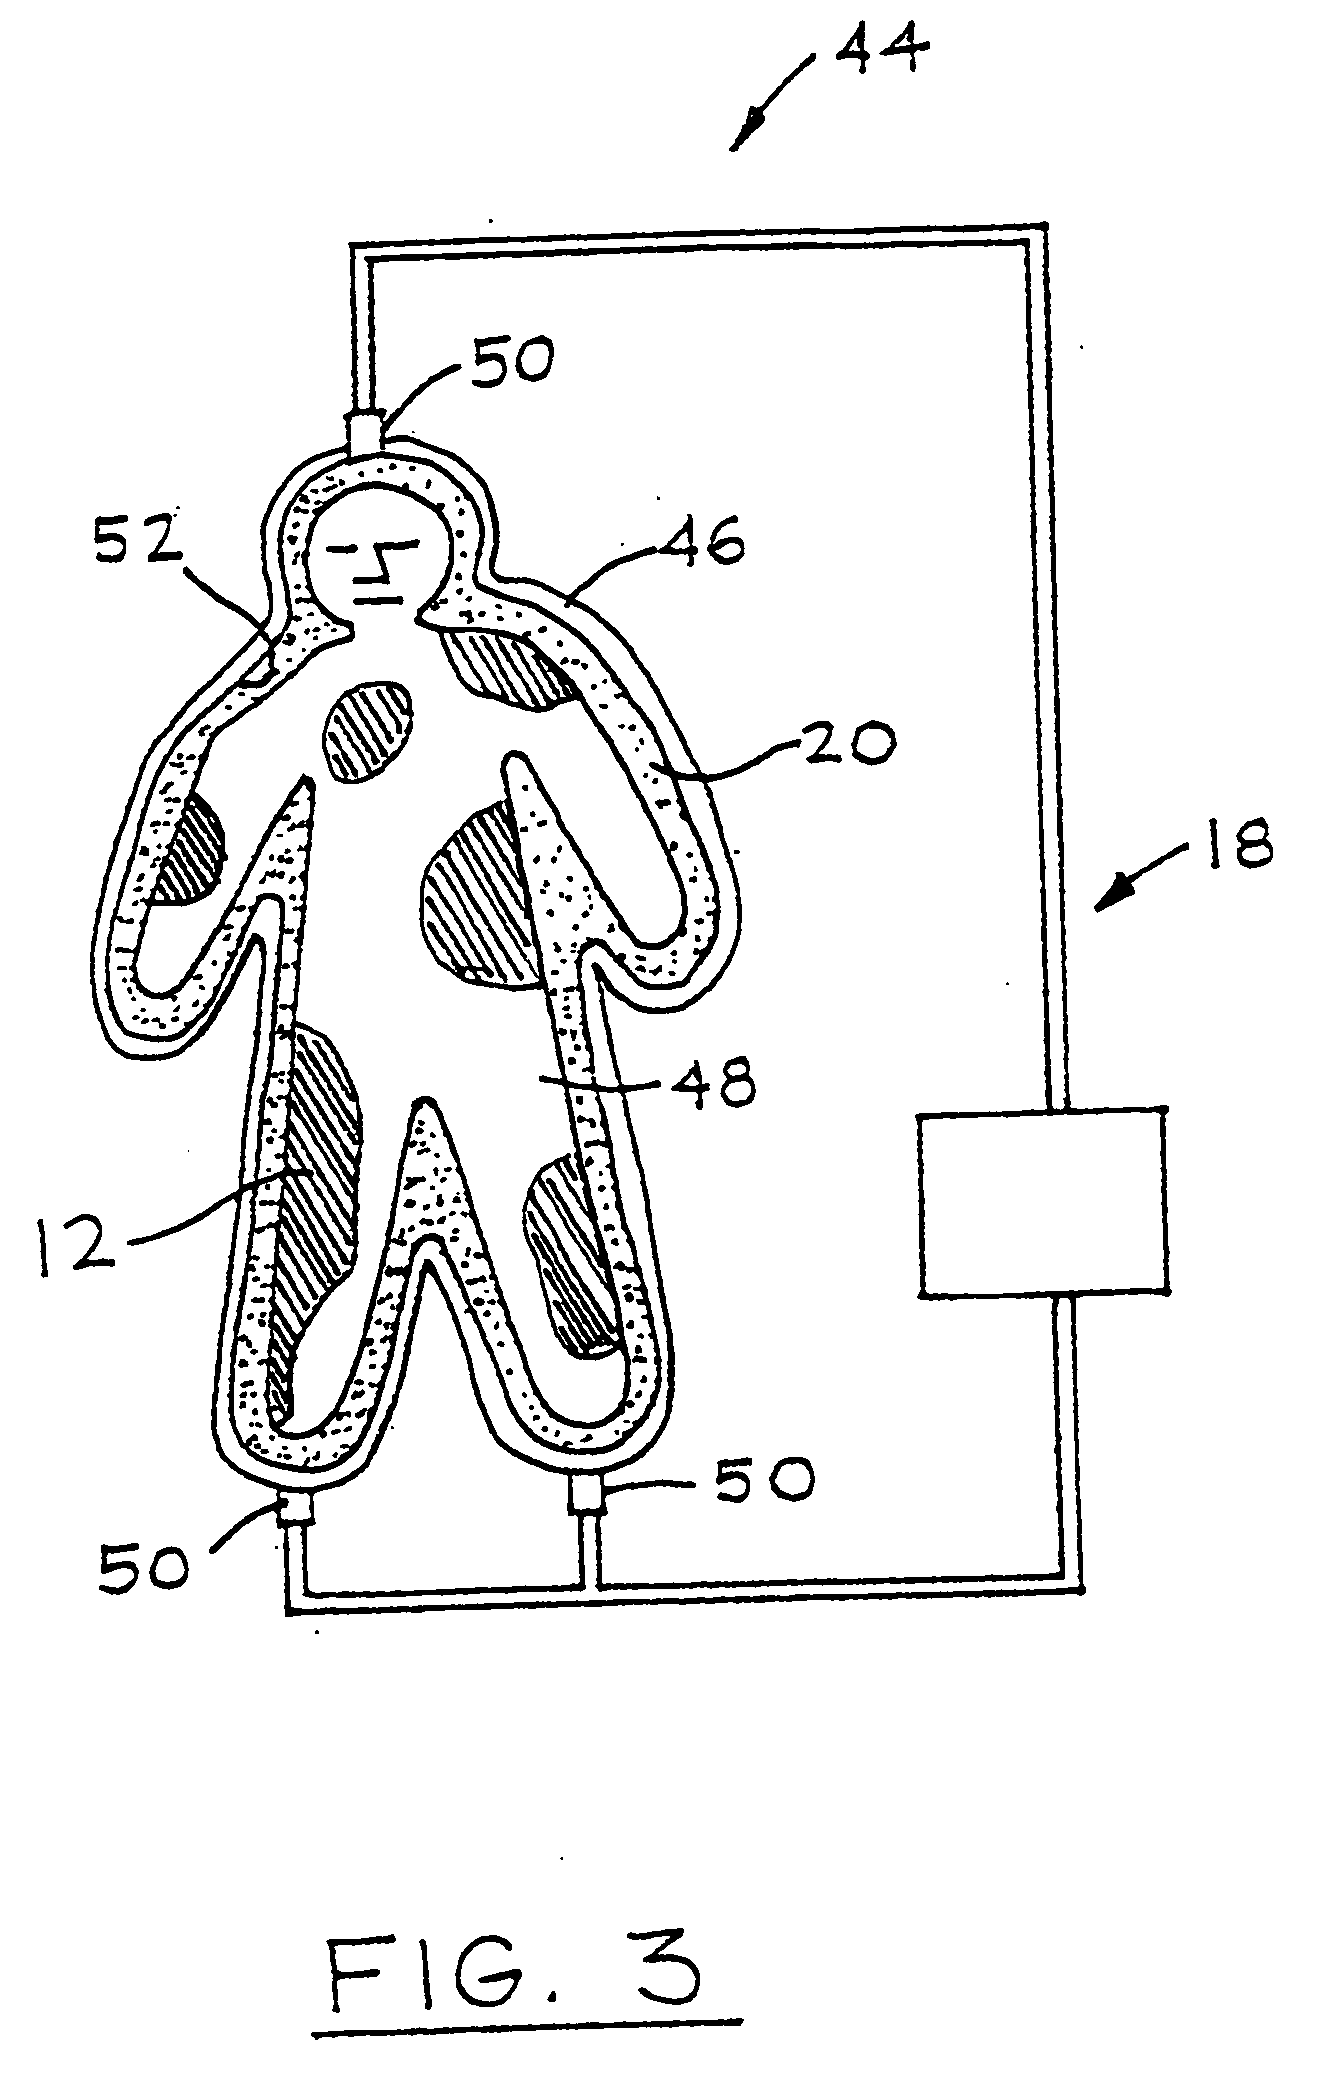 Device for treating and promoting healing of damaged body tissue